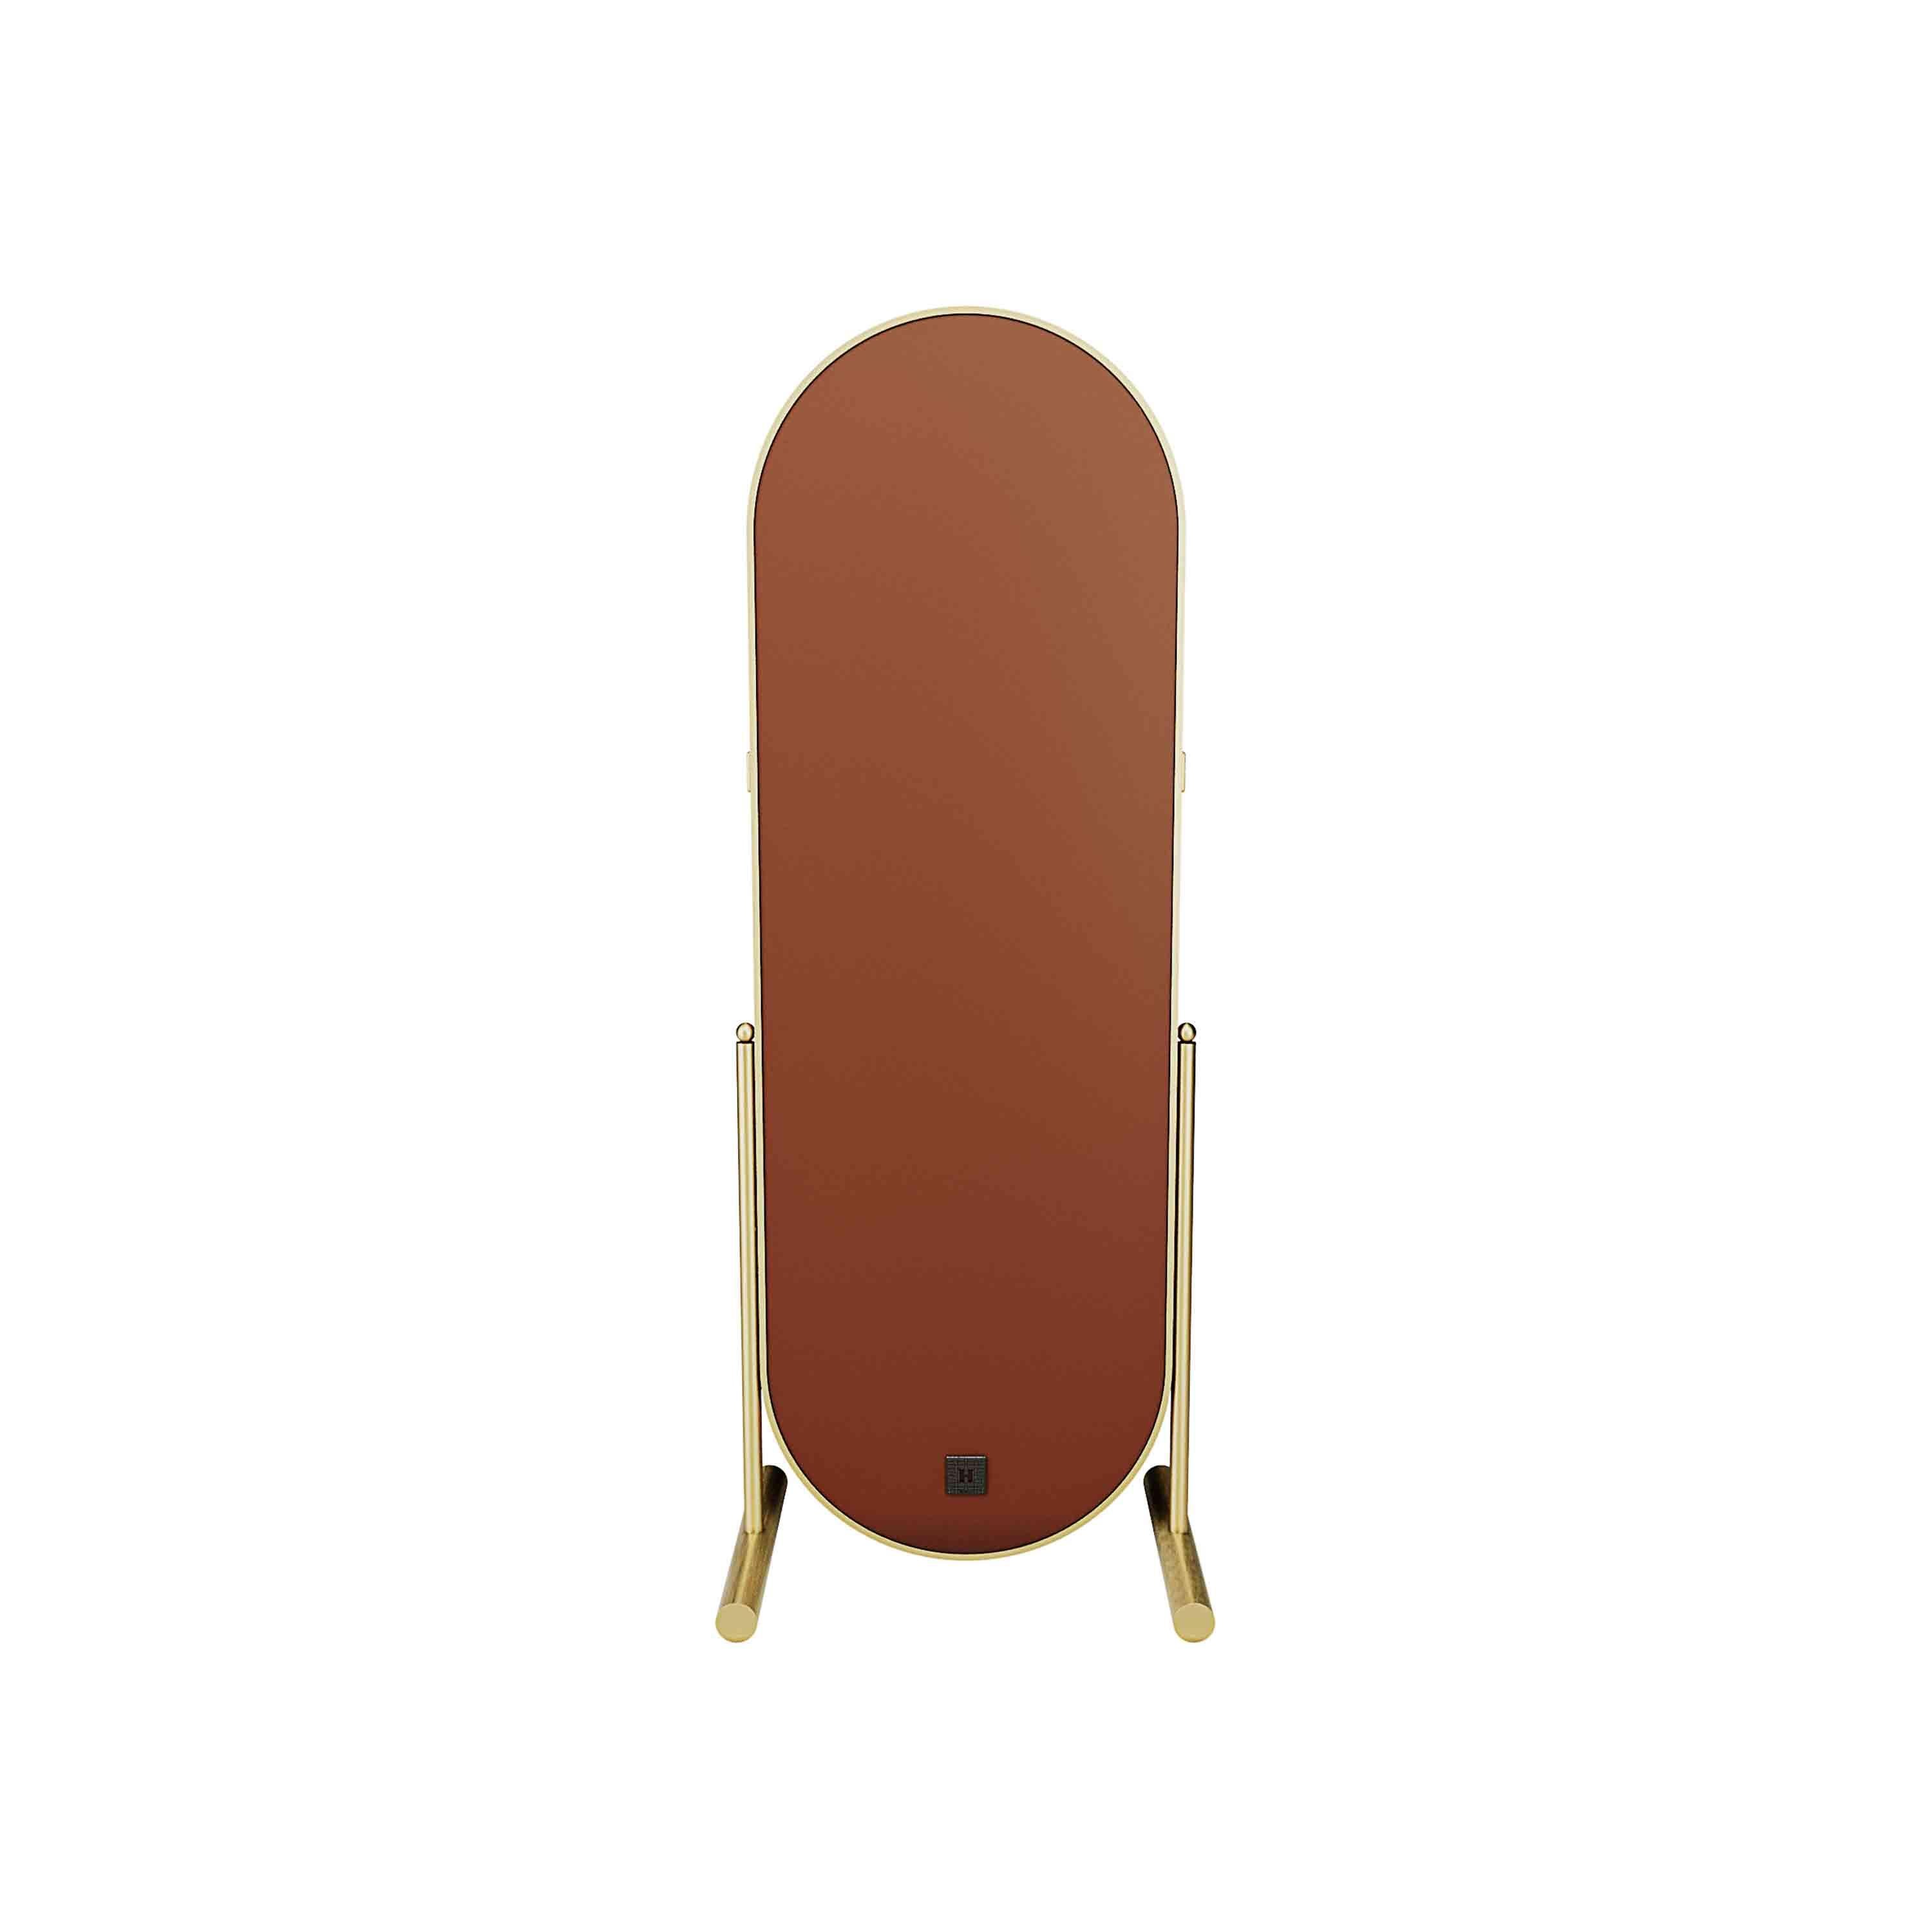 Contemporary Art Deco Style Standing Floor Mirror With Leather Folding Panel & Brushed Brass For Sale